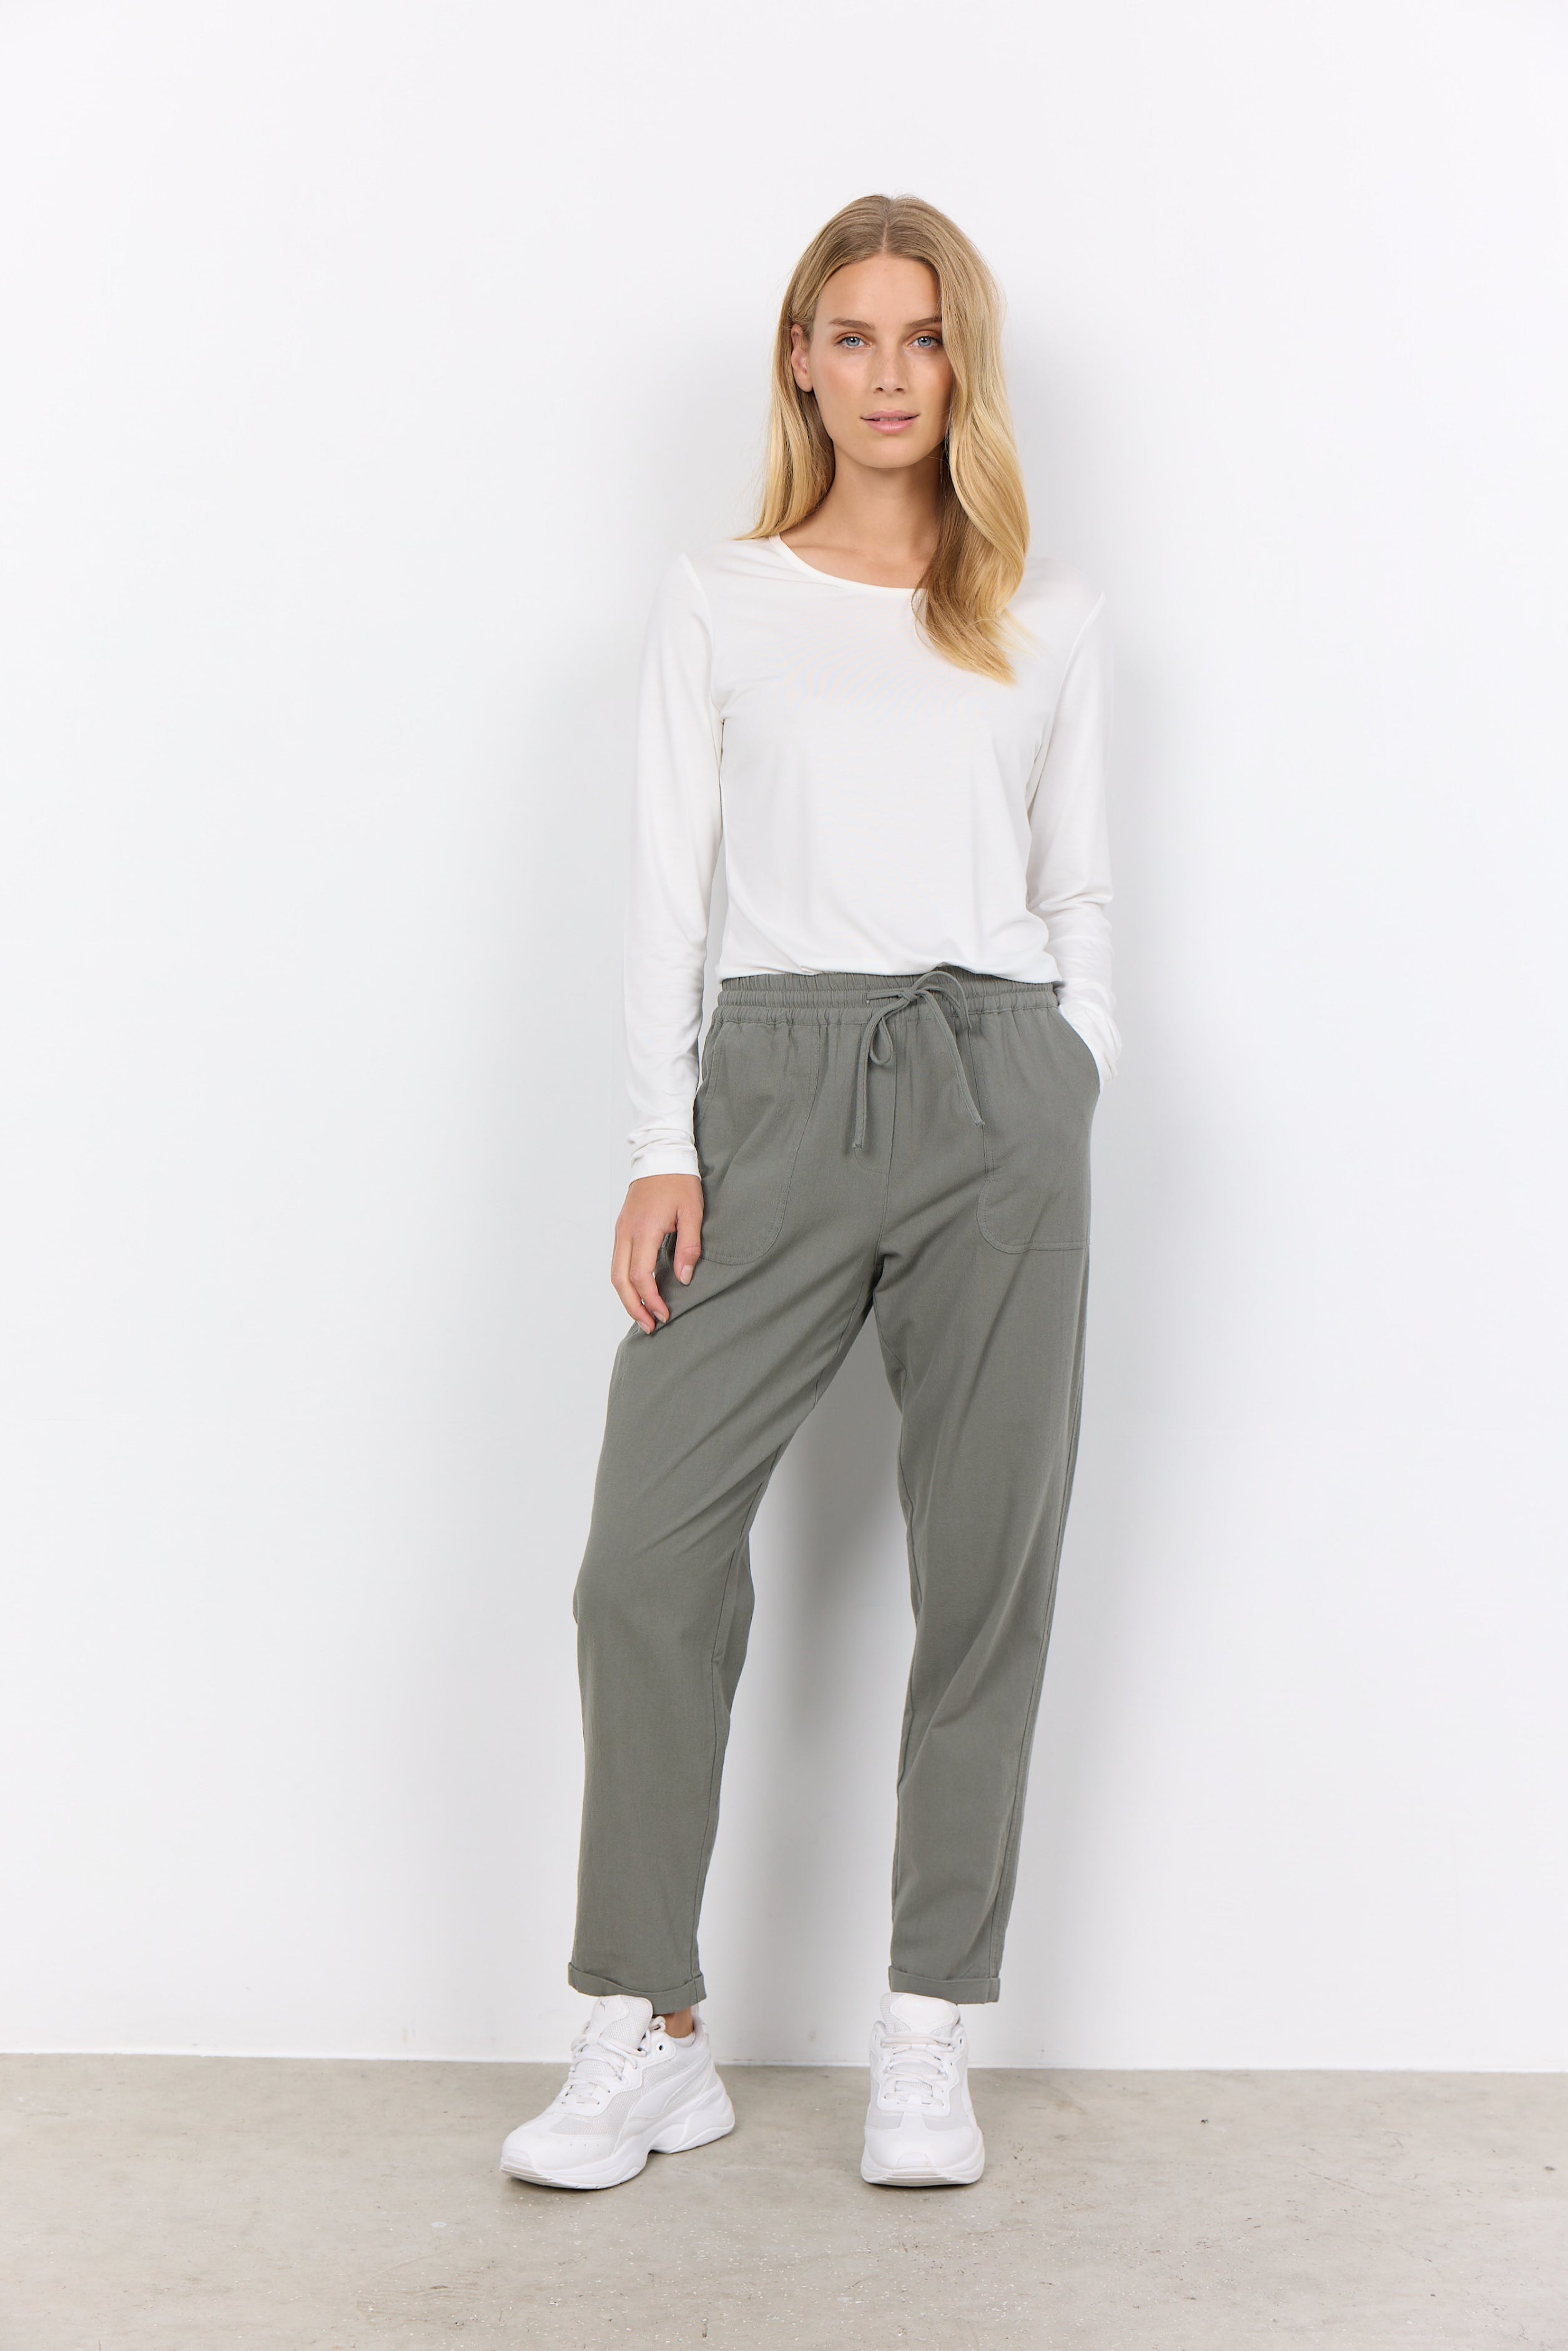 Front view Soya Concept (17195) Women's Ankle Length, Pull On Textured Cotton Pants in Misty Green